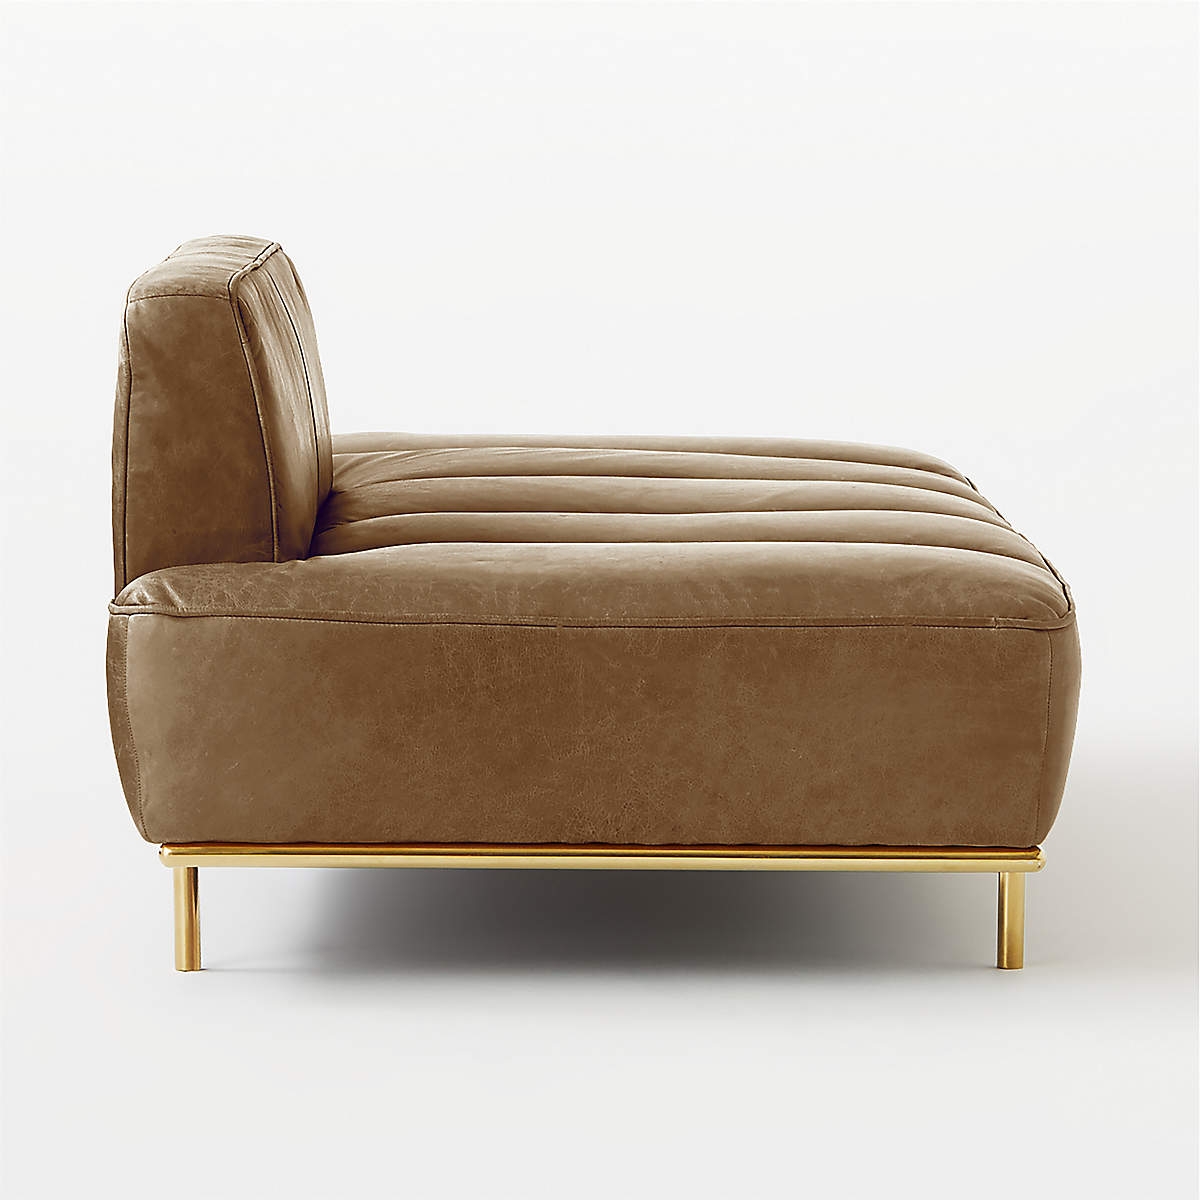 Lawndale Saddle Brown Leather Daybed with Brass Base - Image 3